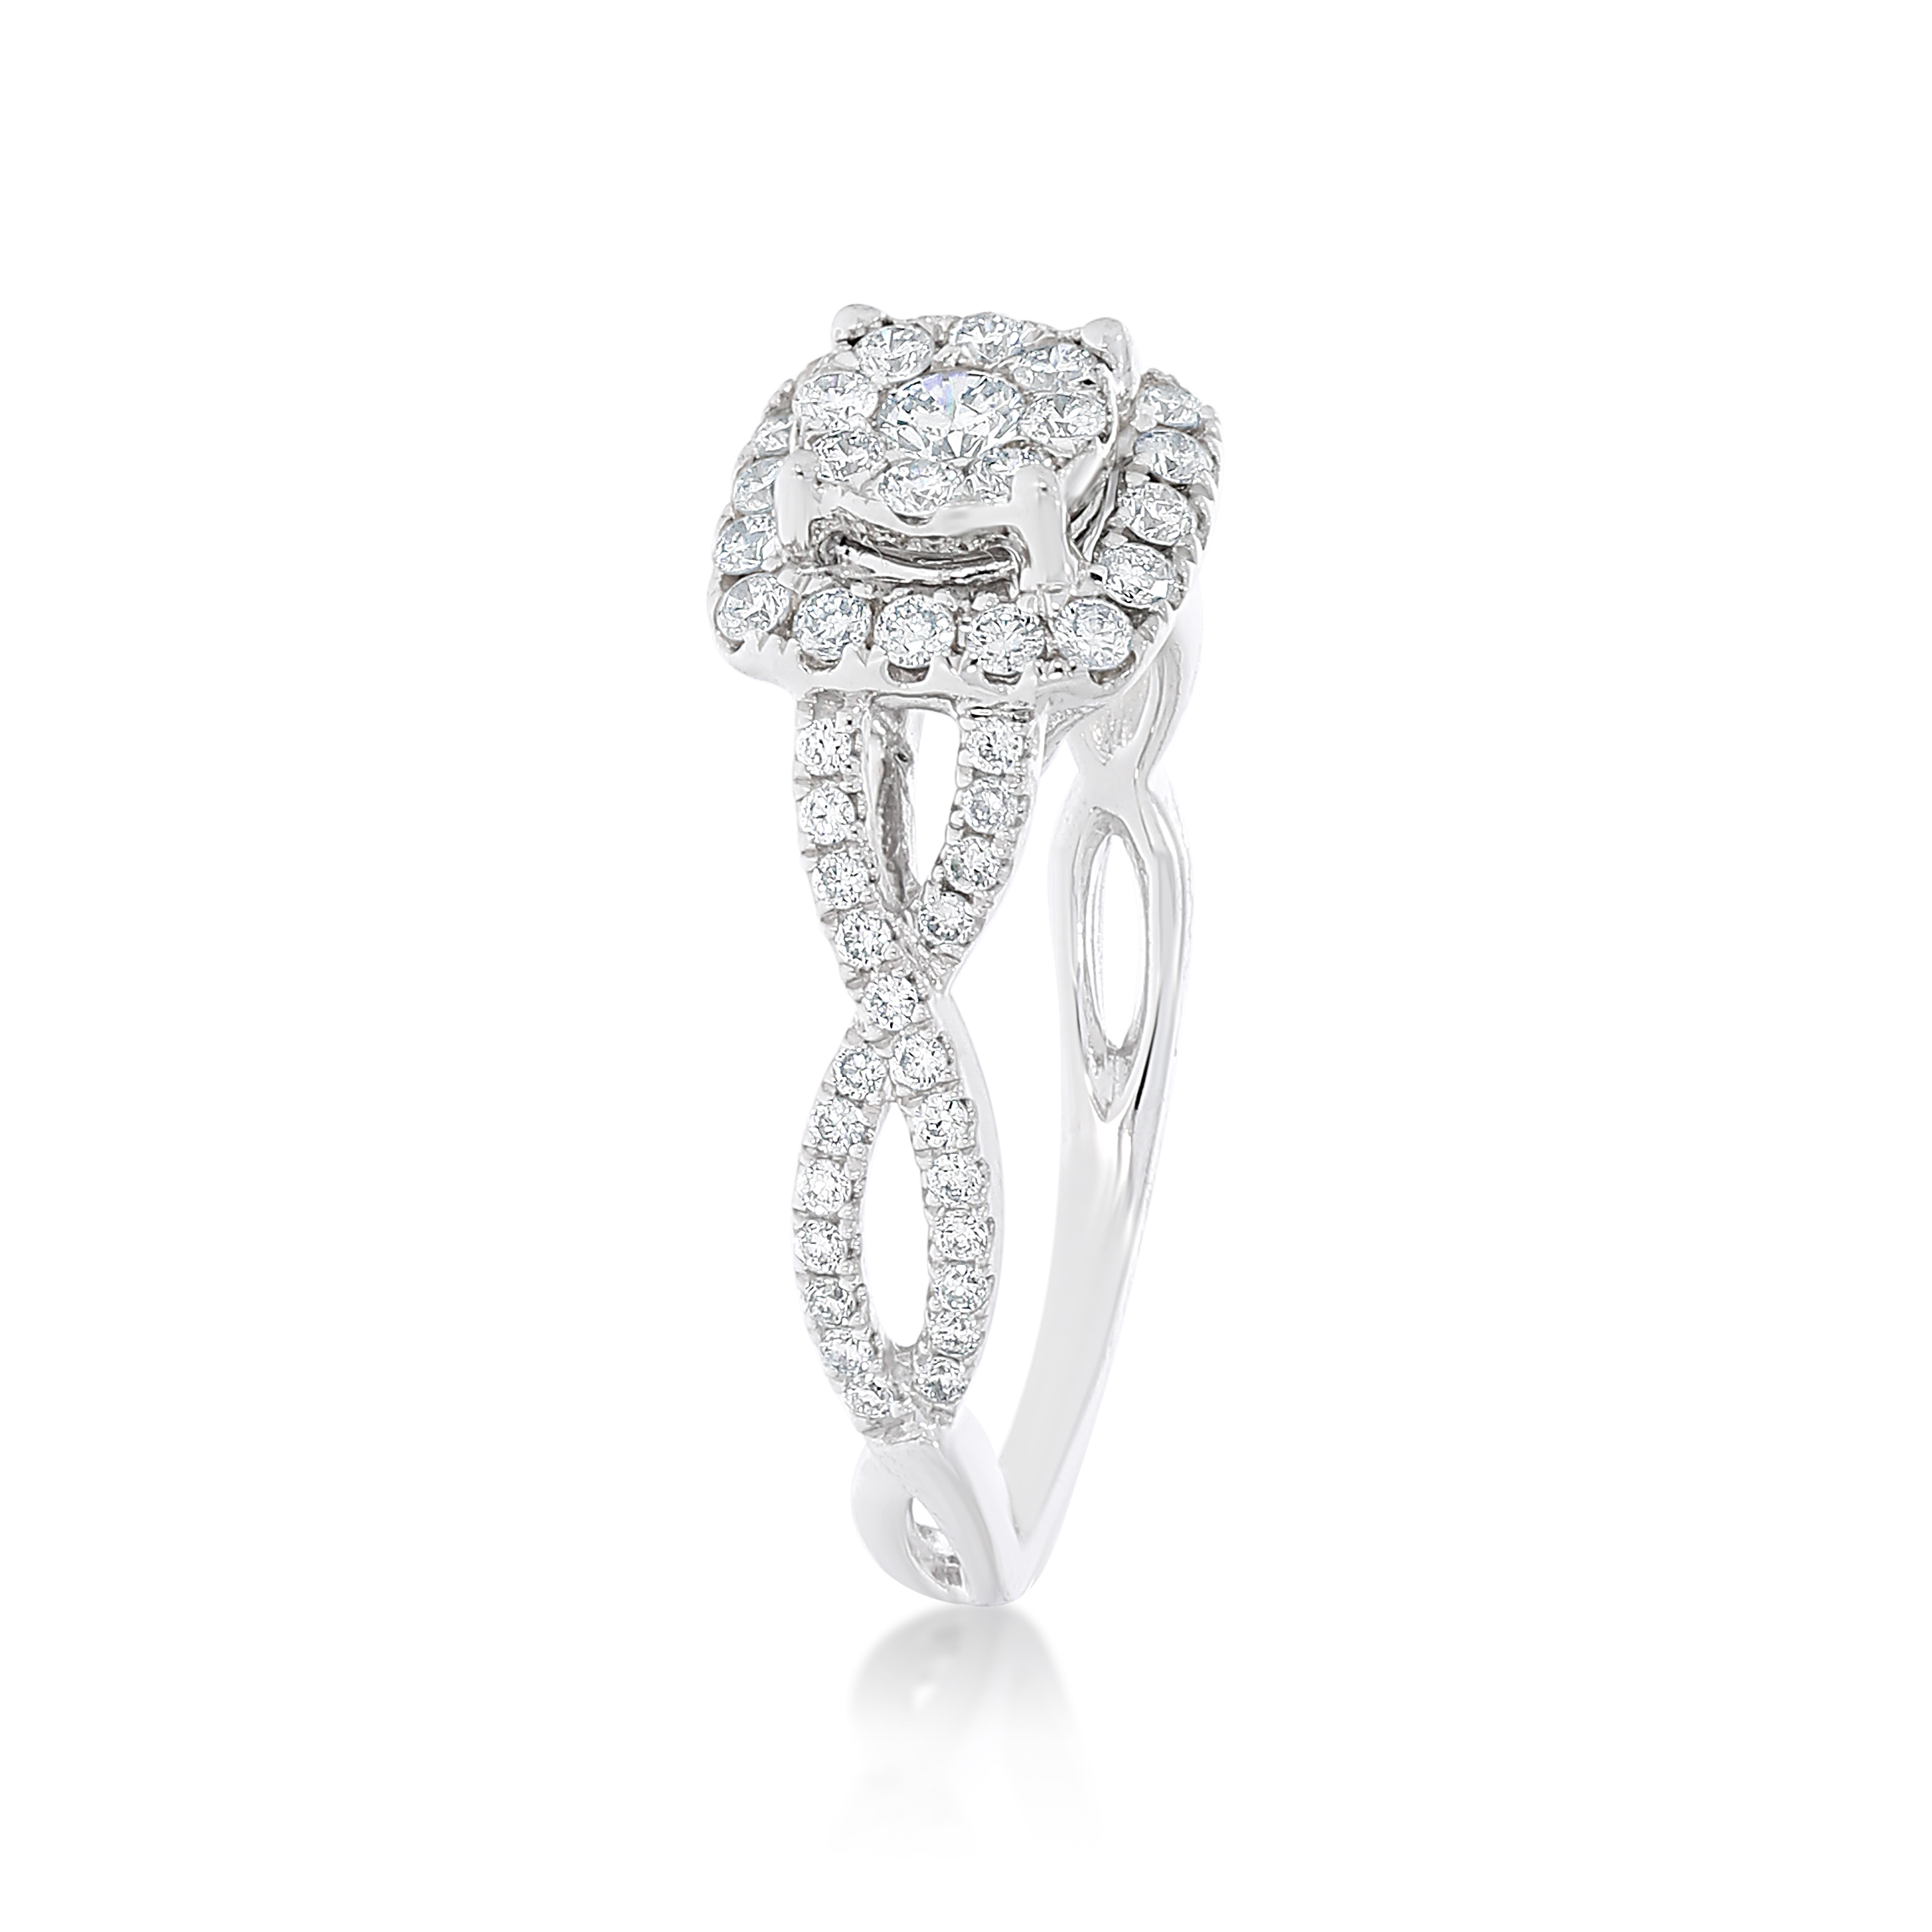 Diamond Engagement Ring Rounded-Square Halo 0.62 ct. 14k White Gold